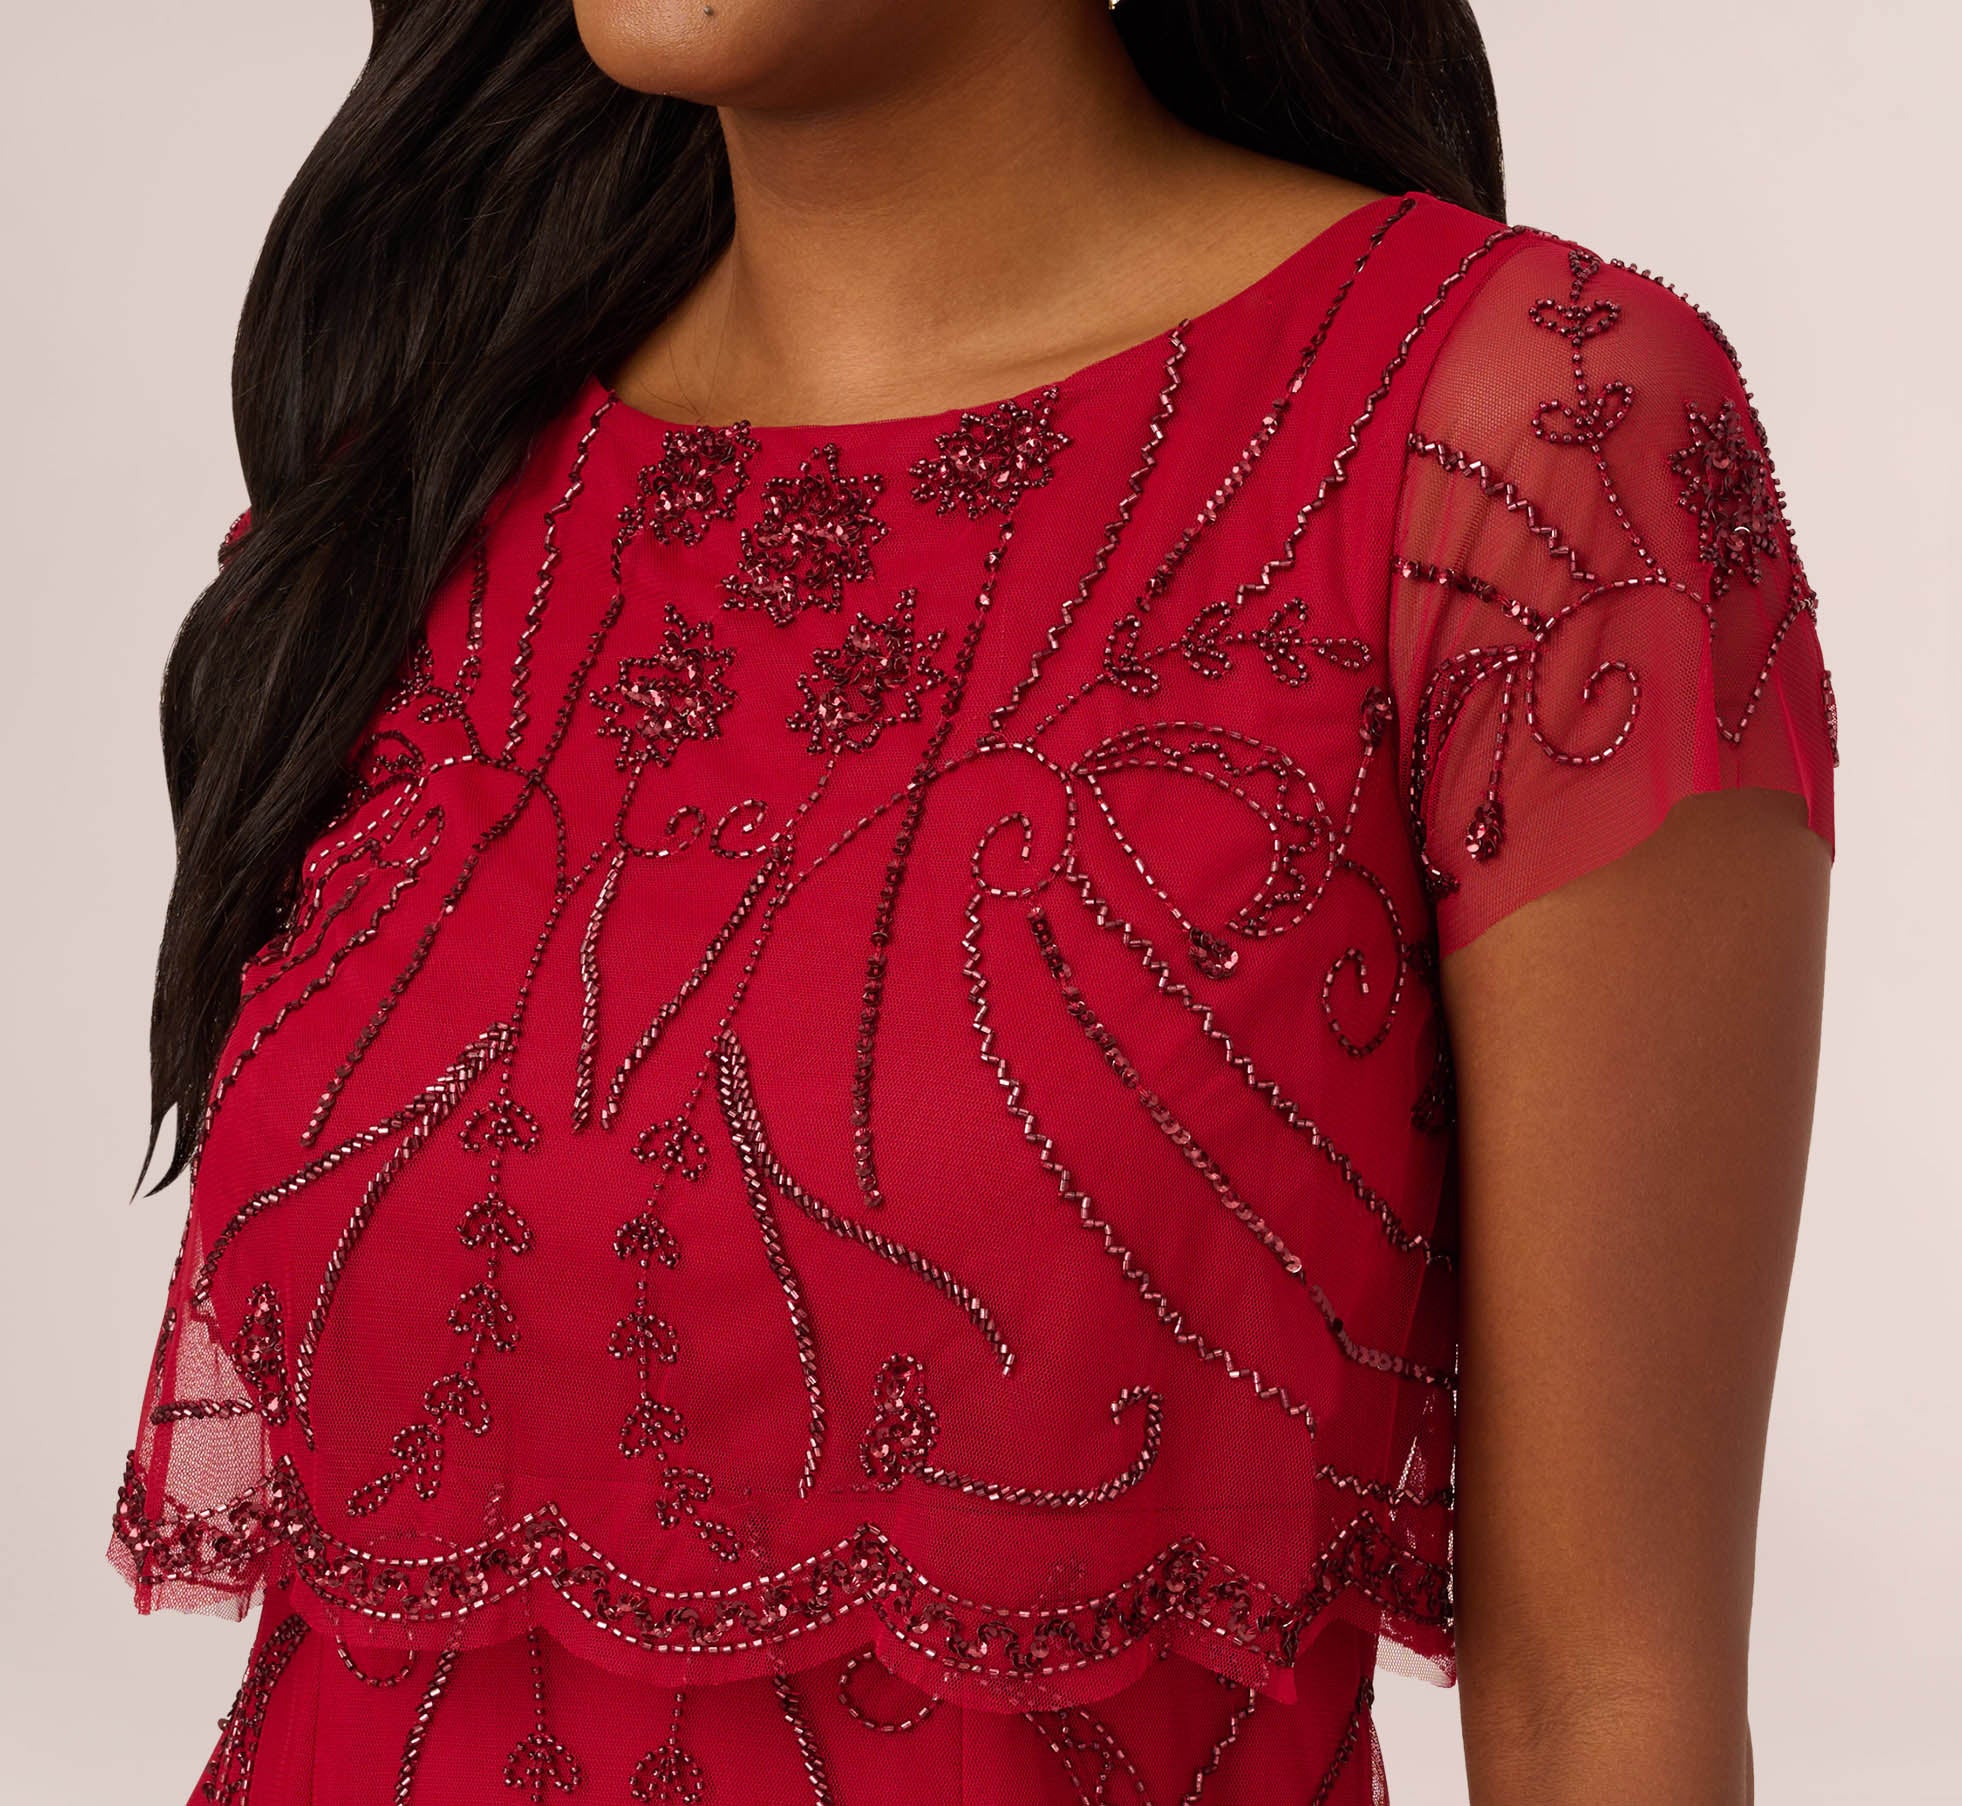 Beaded Scalloped Popover Gown With Short Sleeves In Cranberry